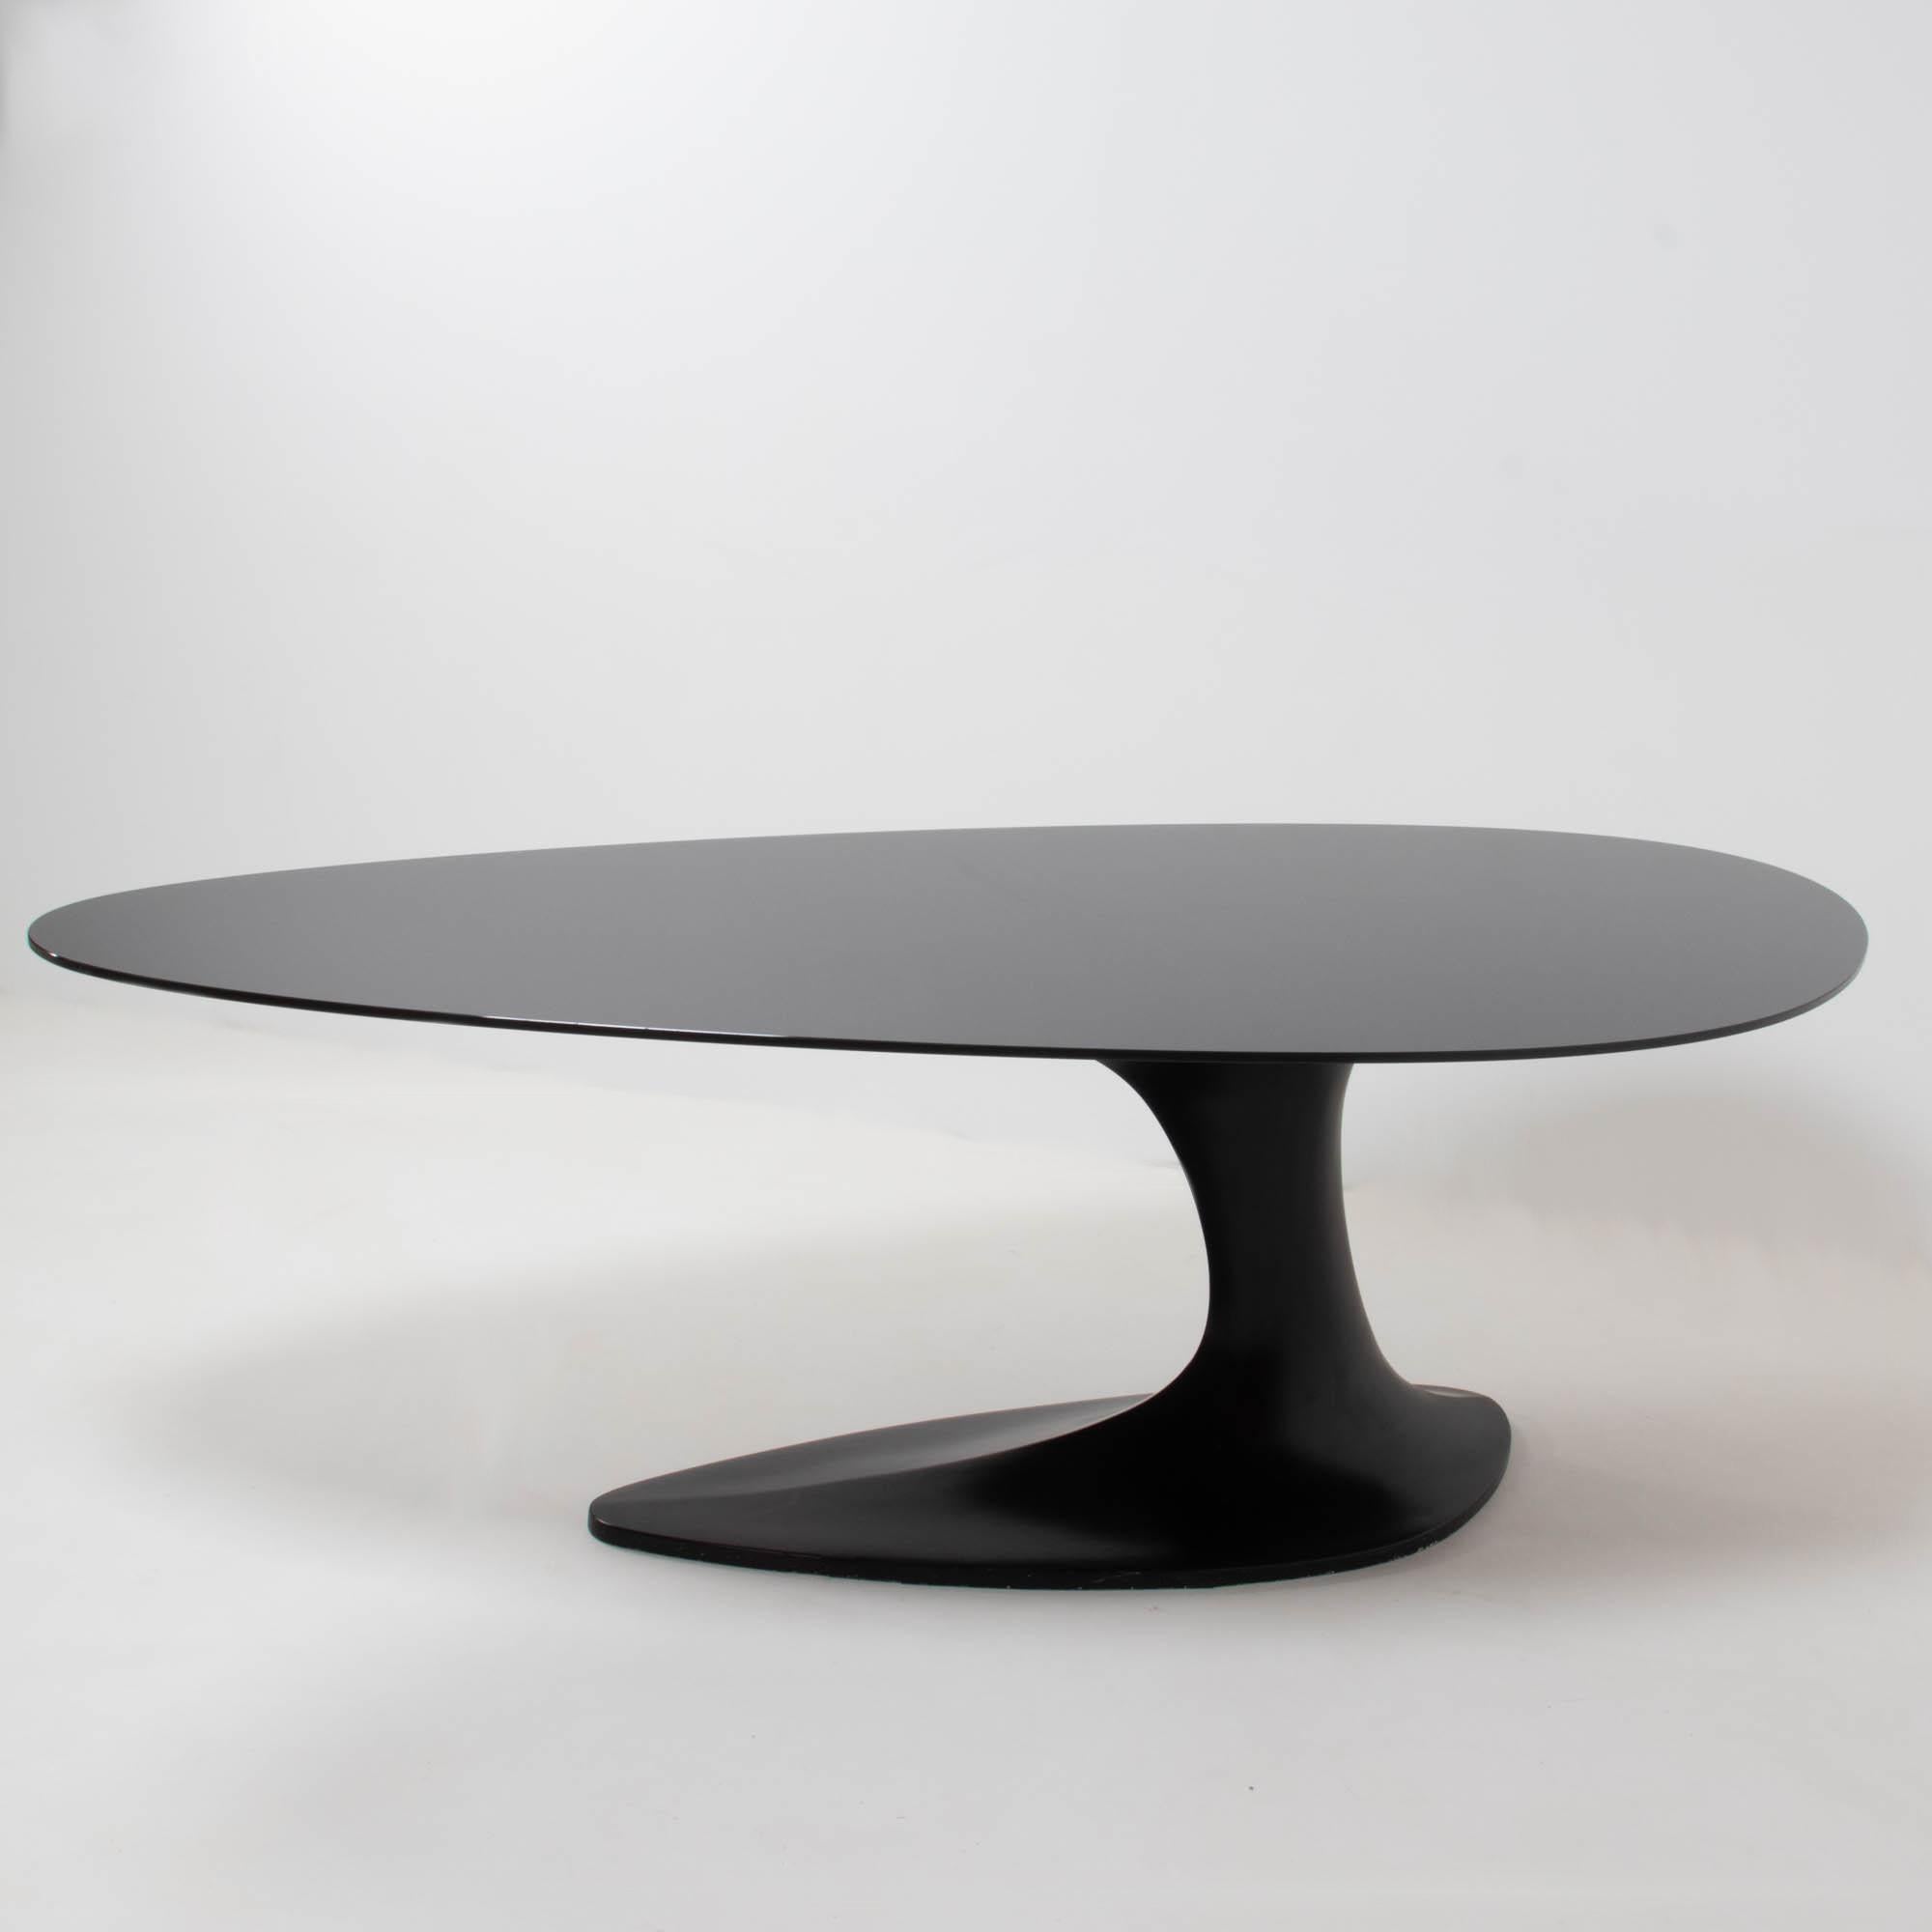 Contemporary Roche Bobois Black Dining Table and Six Chairs by Sacha Lakic, 2005